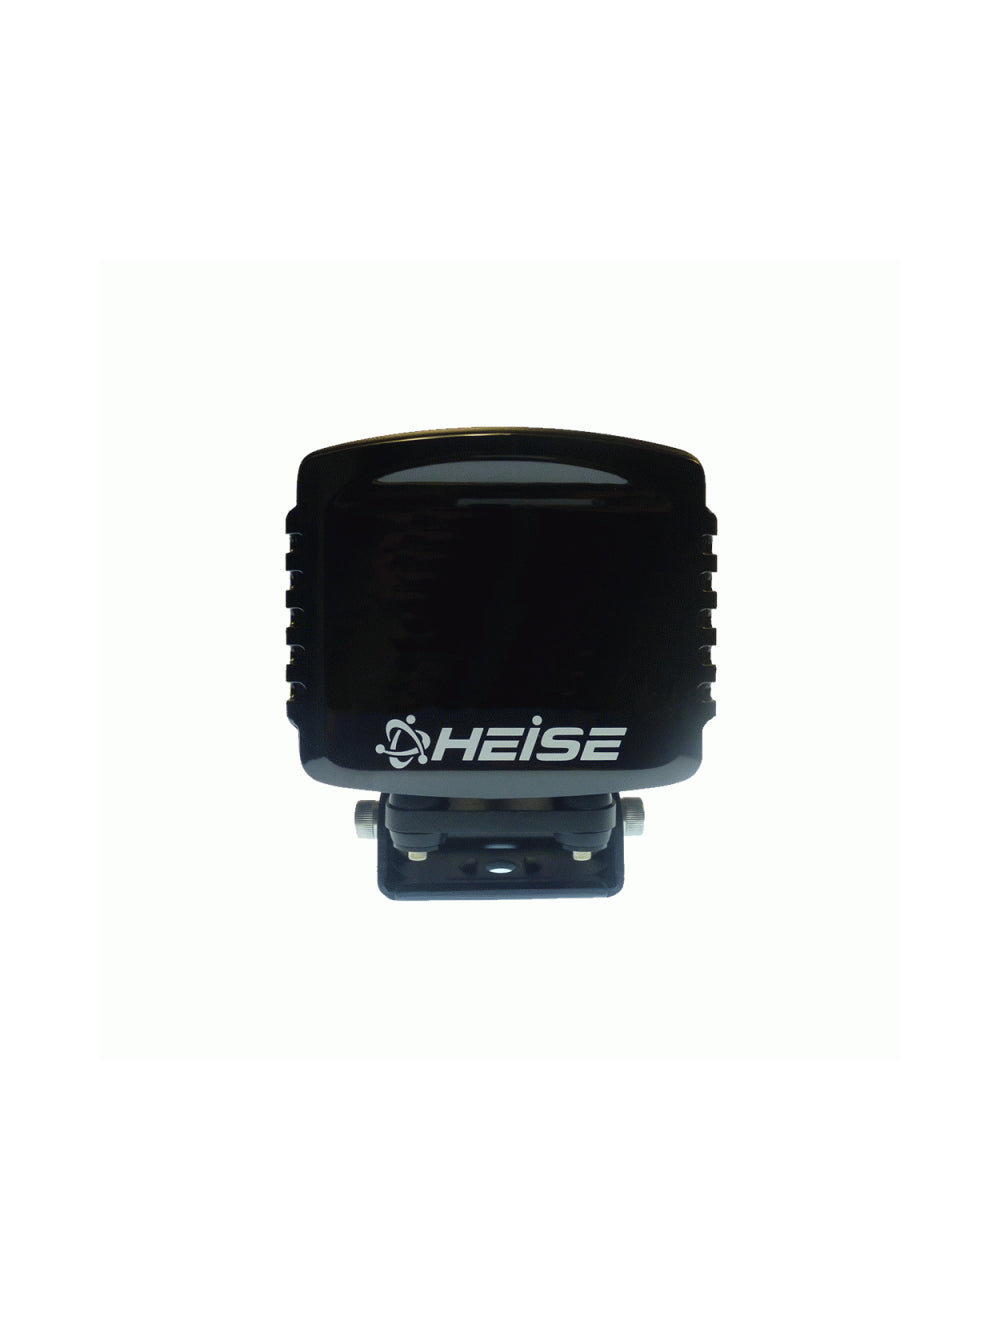 Heise HE-WLC475 Optional Light Cover For The HE-WL3